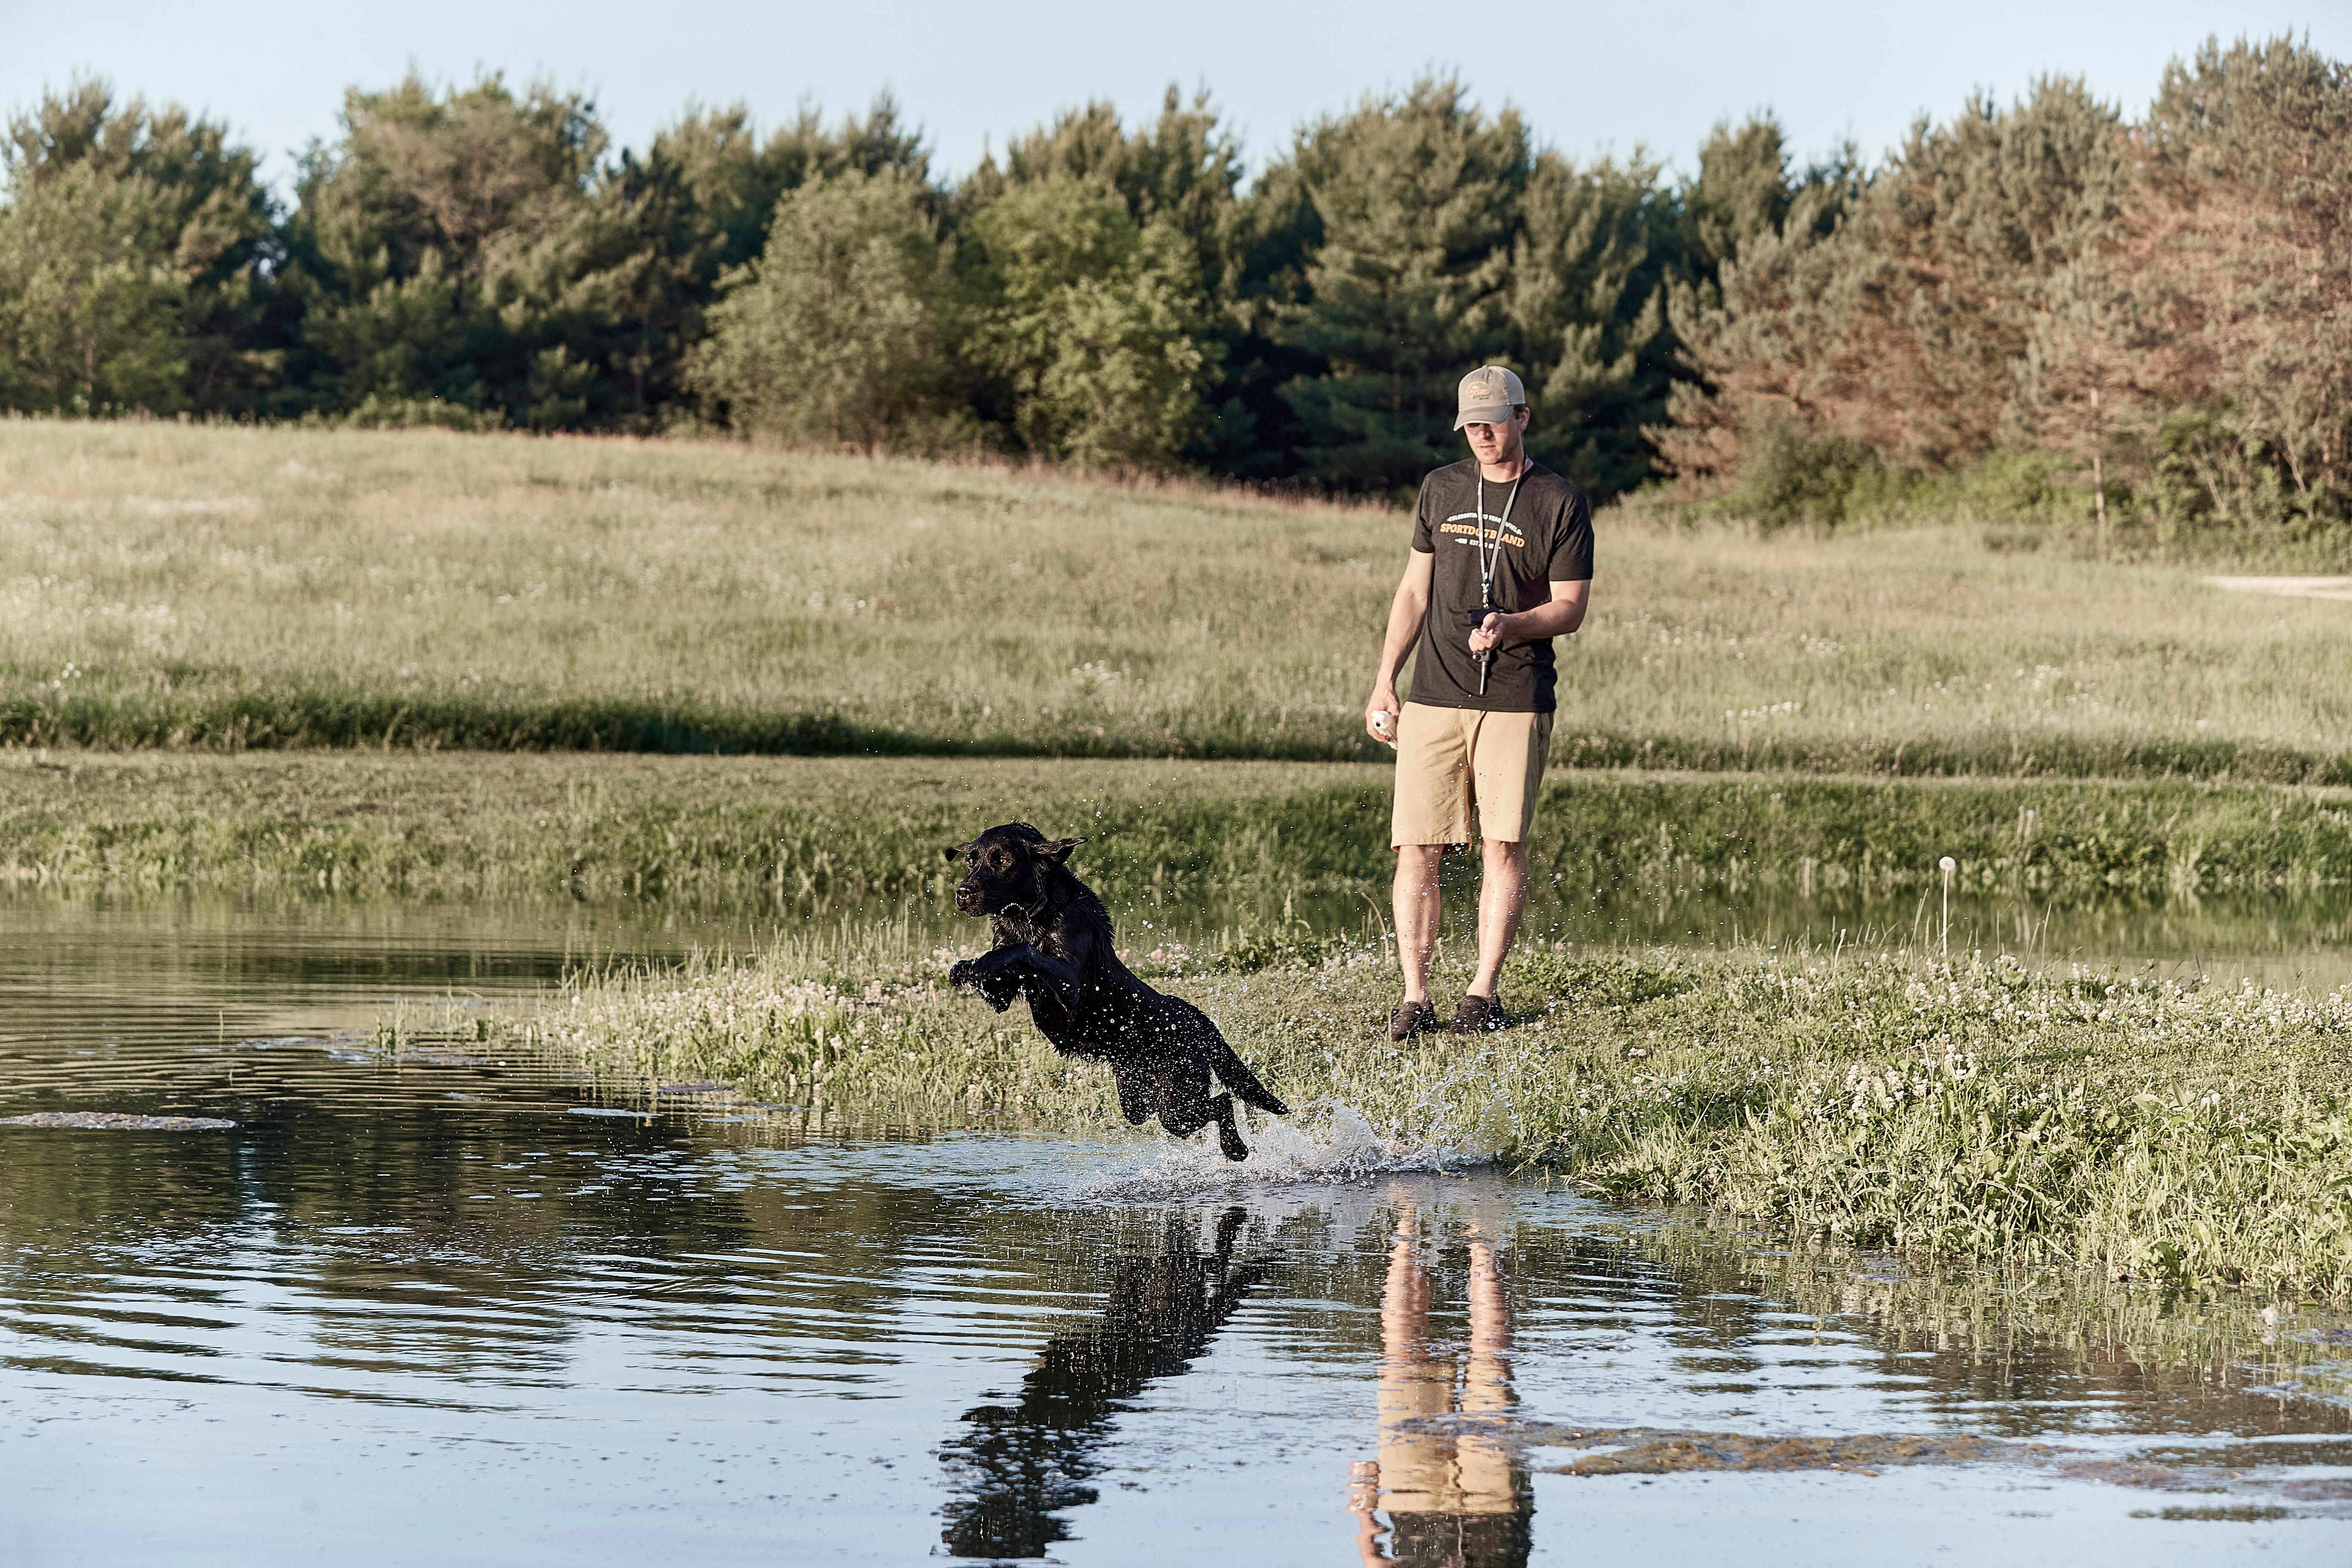 Black lab jumping in to water to retrieve dummy with man standing on shore.